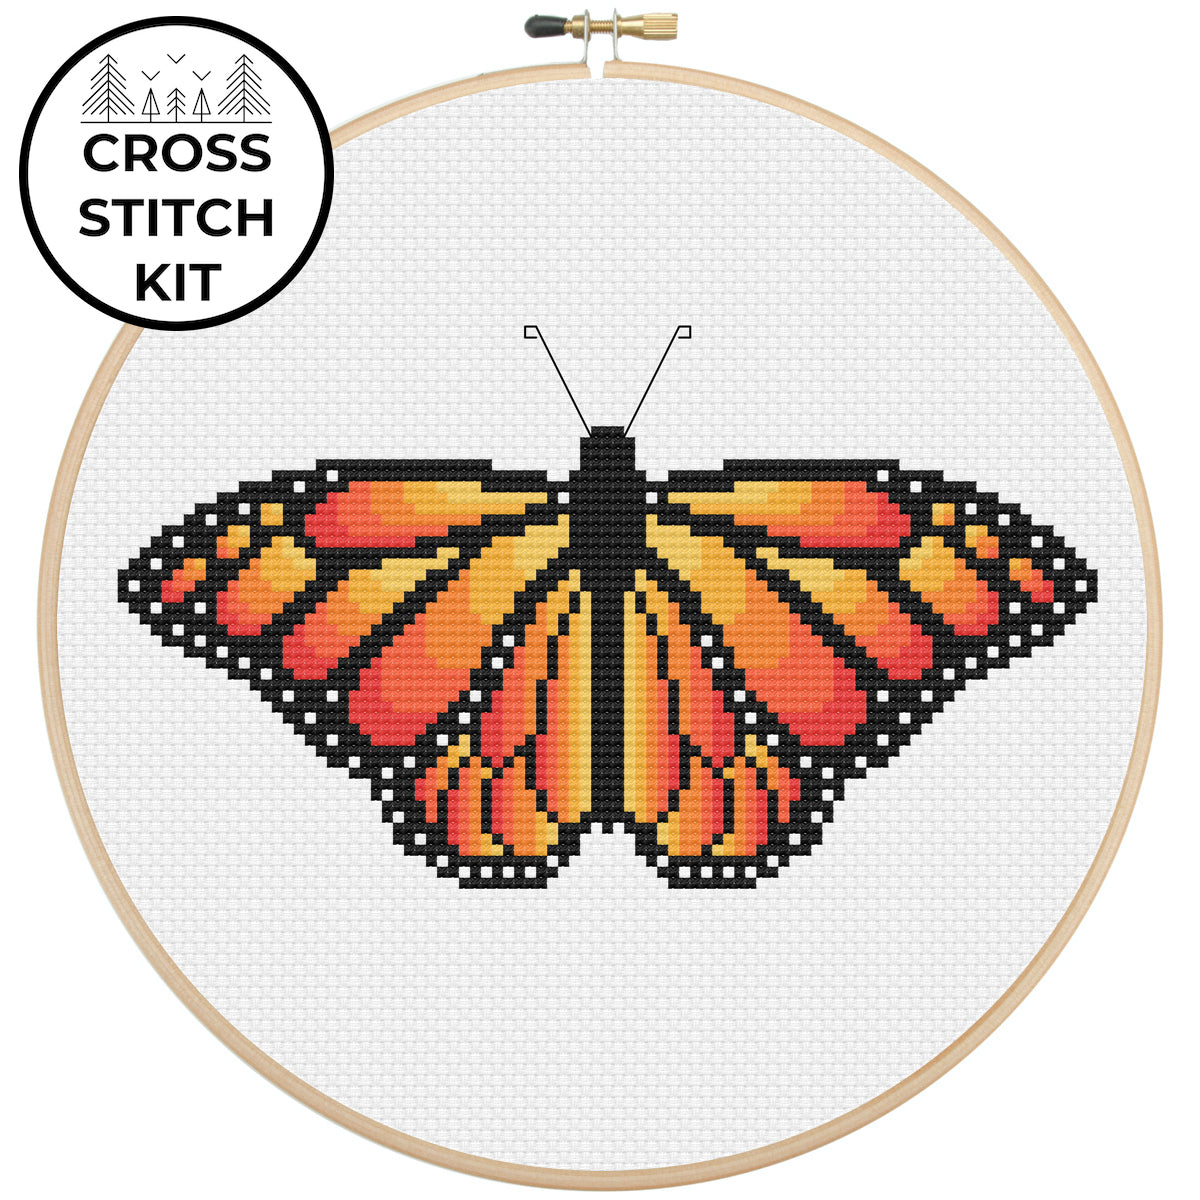 Monarch Butterfly Cross Stitch Kit – Pigeon Coop